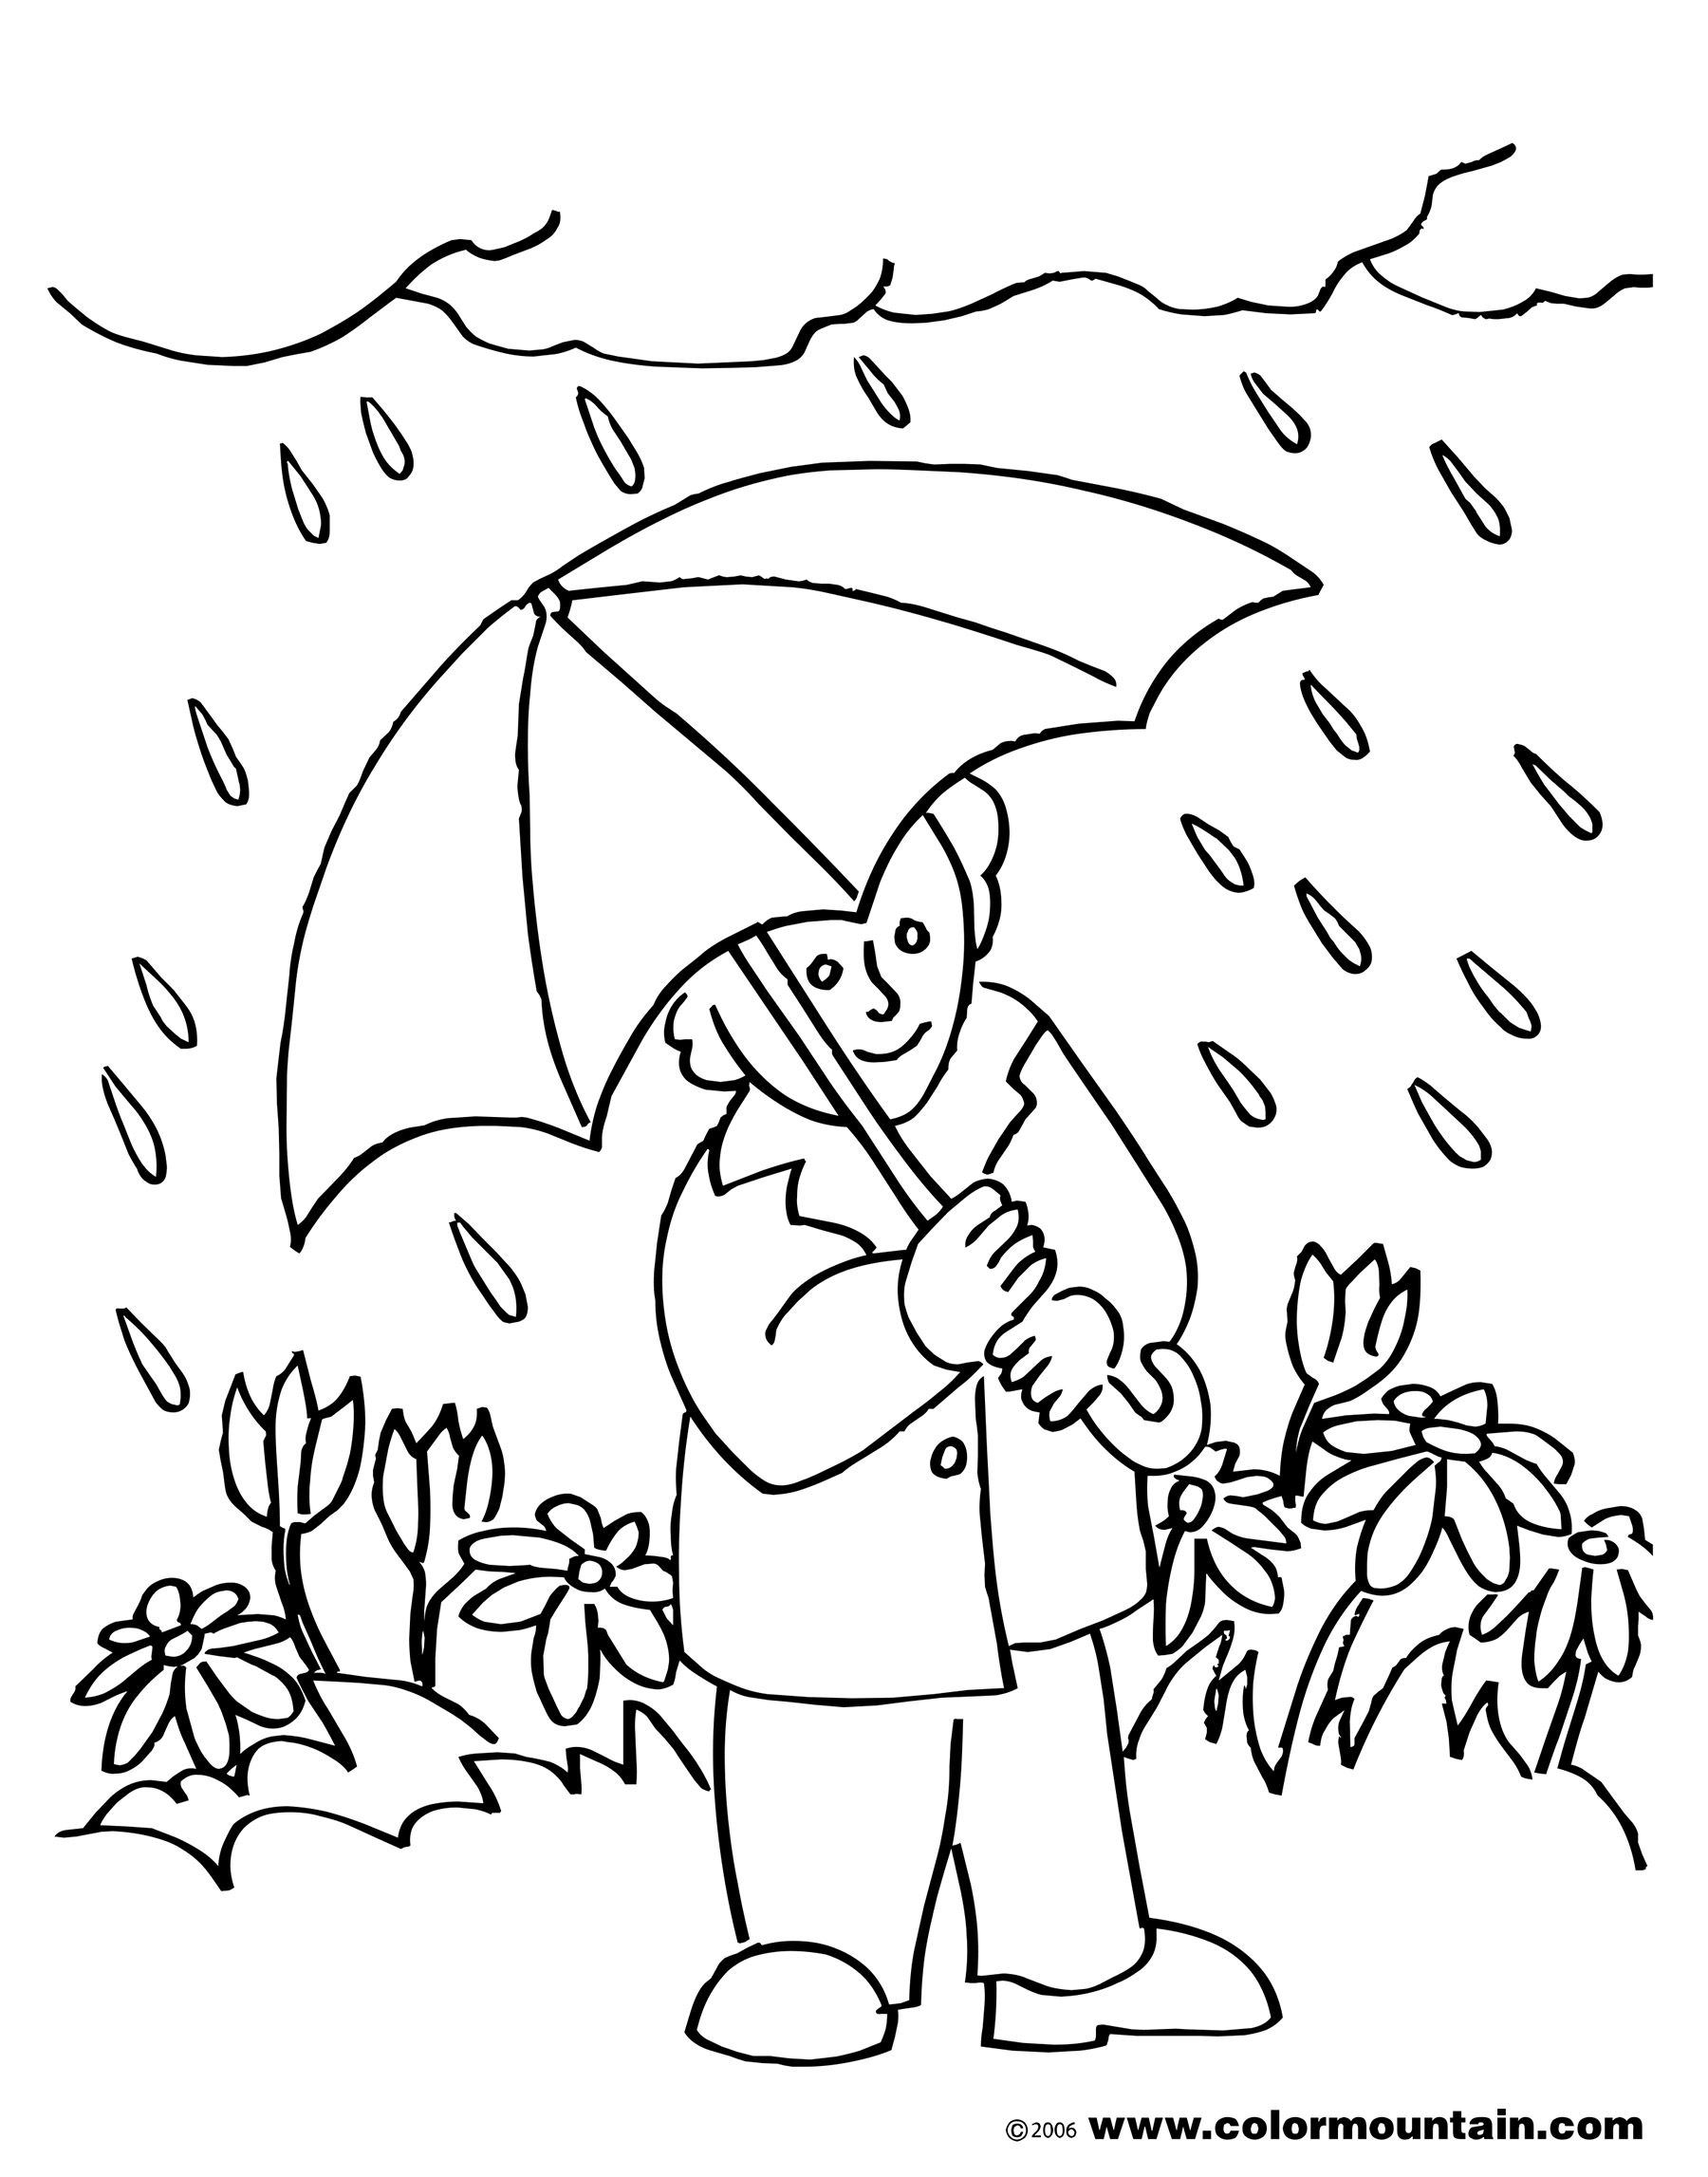 April Showers Bring May Flowers Clip Art Black And White April Showers    